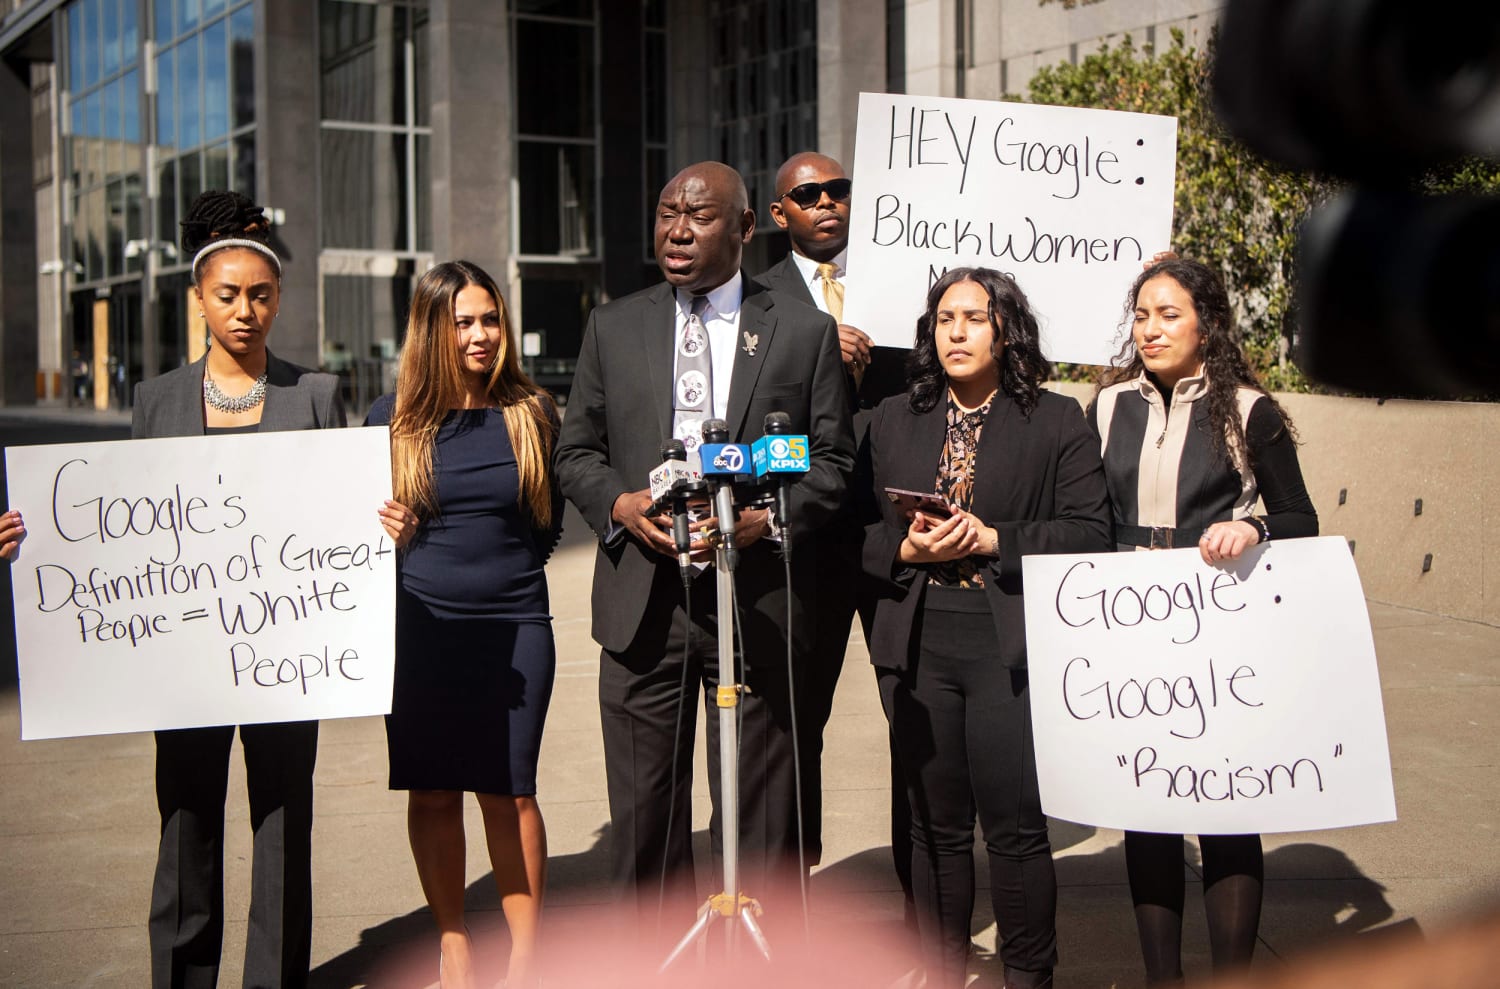 Black women allege Google fosters racist culture in lawsuit against the company